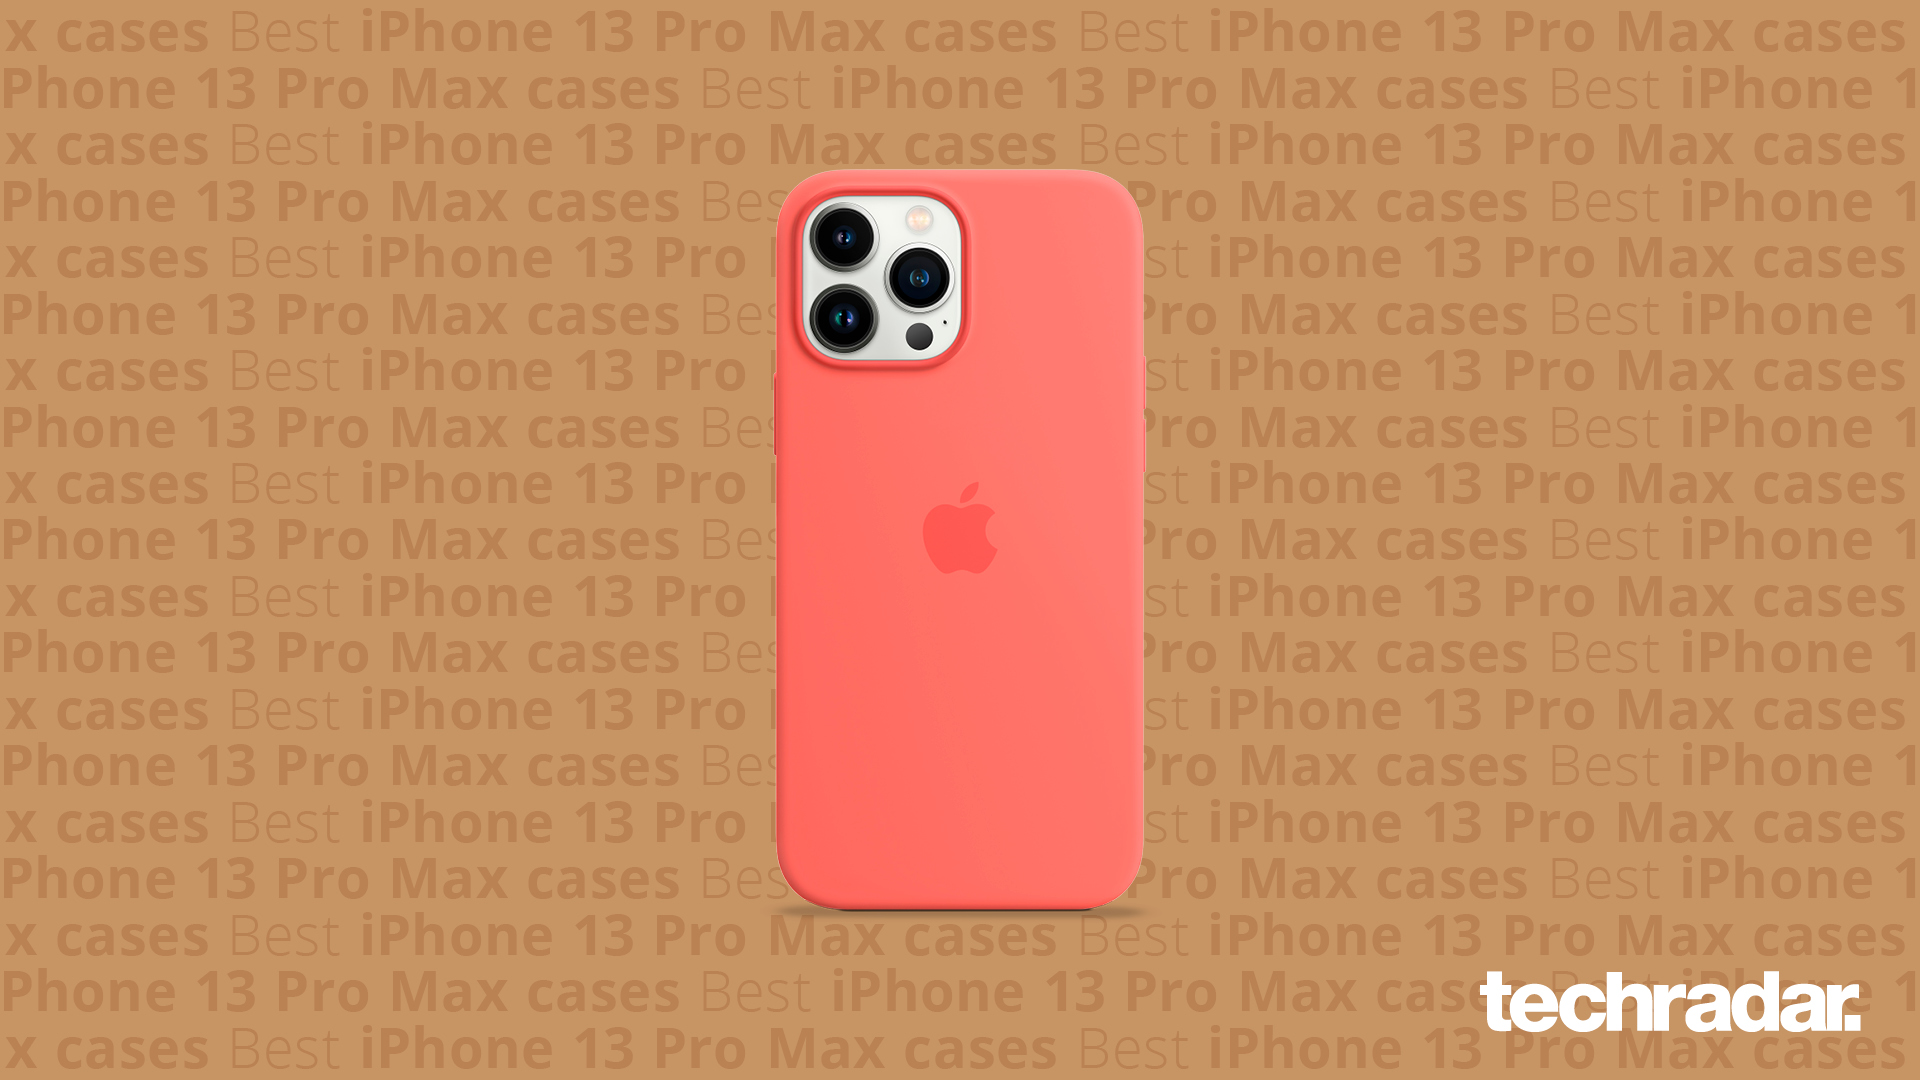 Best iPhone 13 cases 2022: Designs for Apple's pro, pro max and